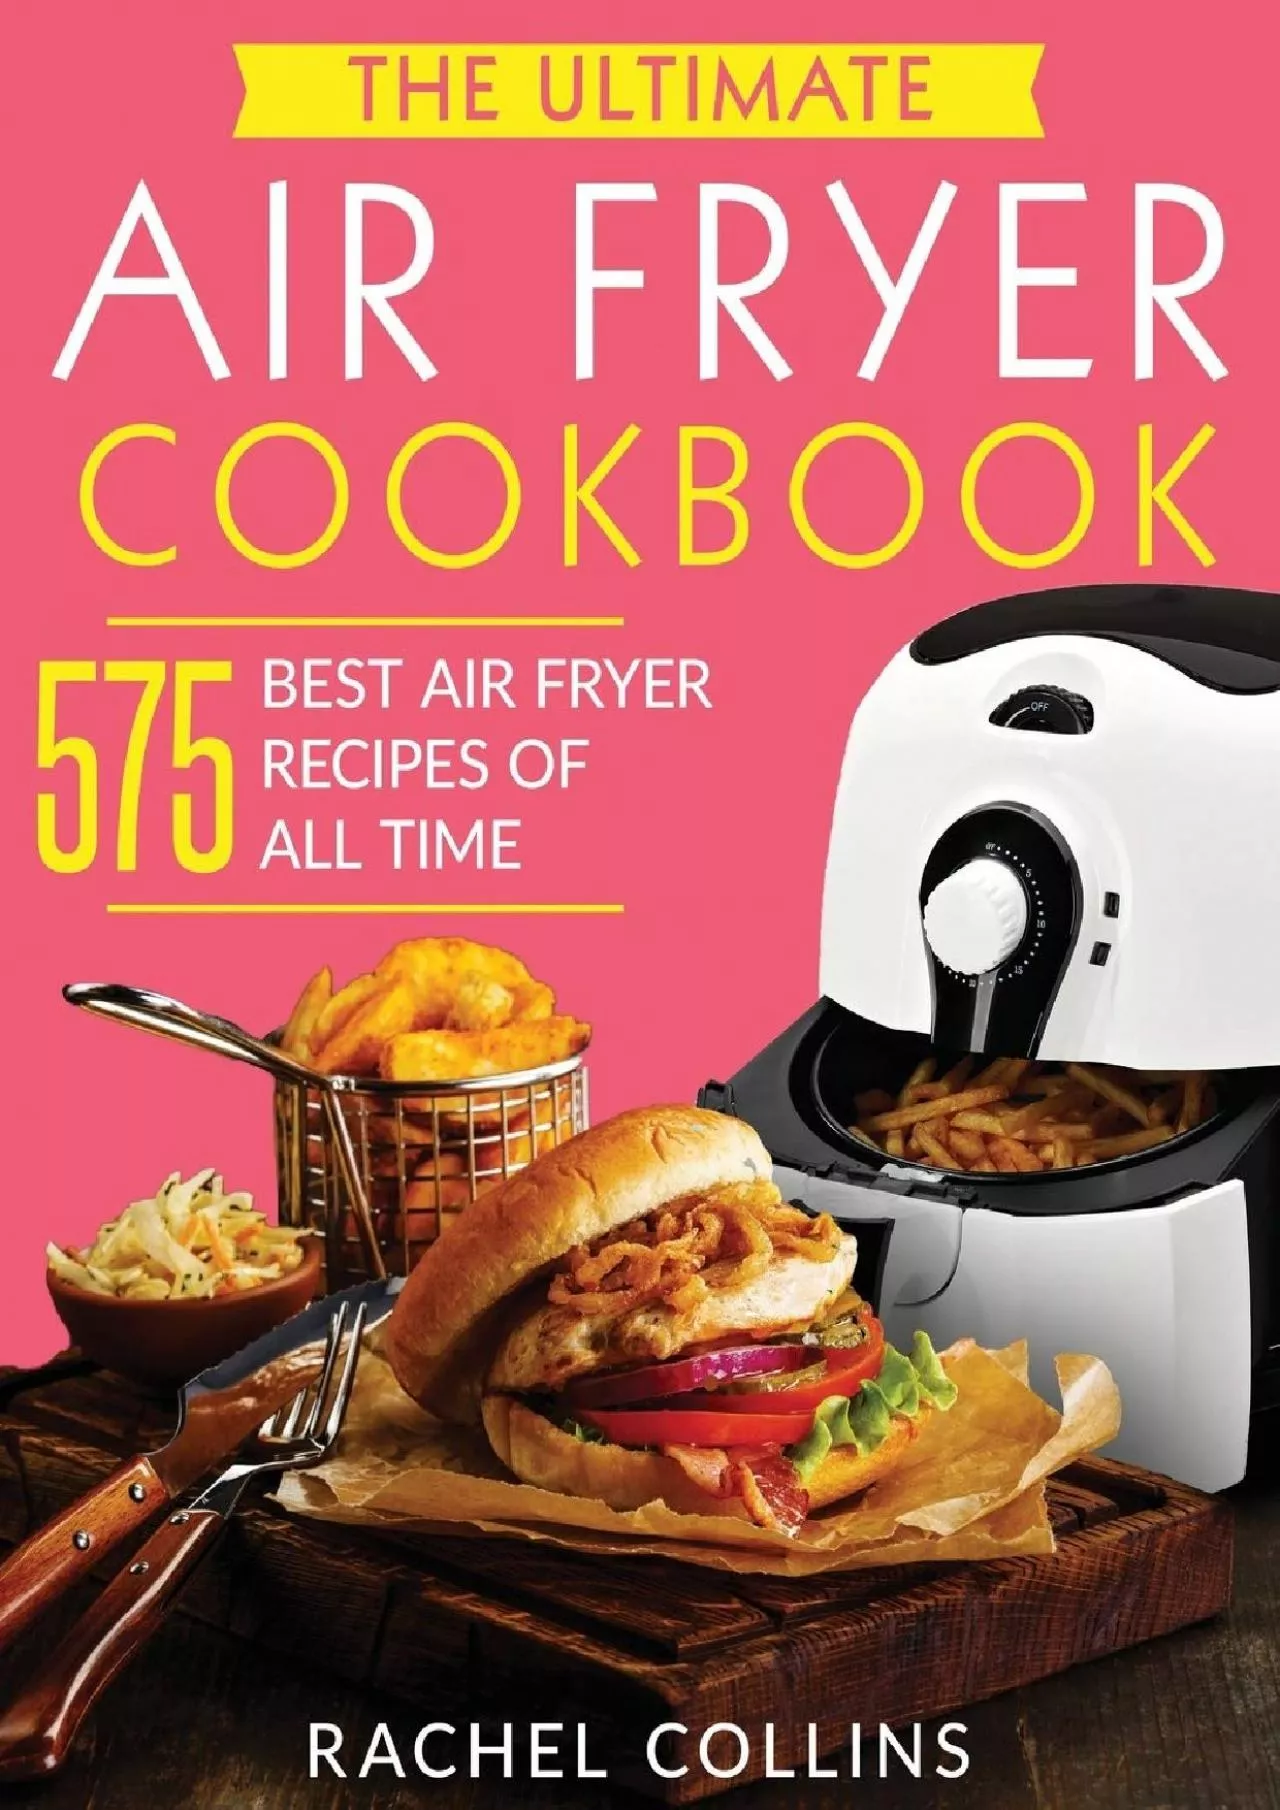 [eBOOK]-The Ultimate Air Fryer Cookbook 575 Best Air Fryer Recipes of All Time (with Nutrition